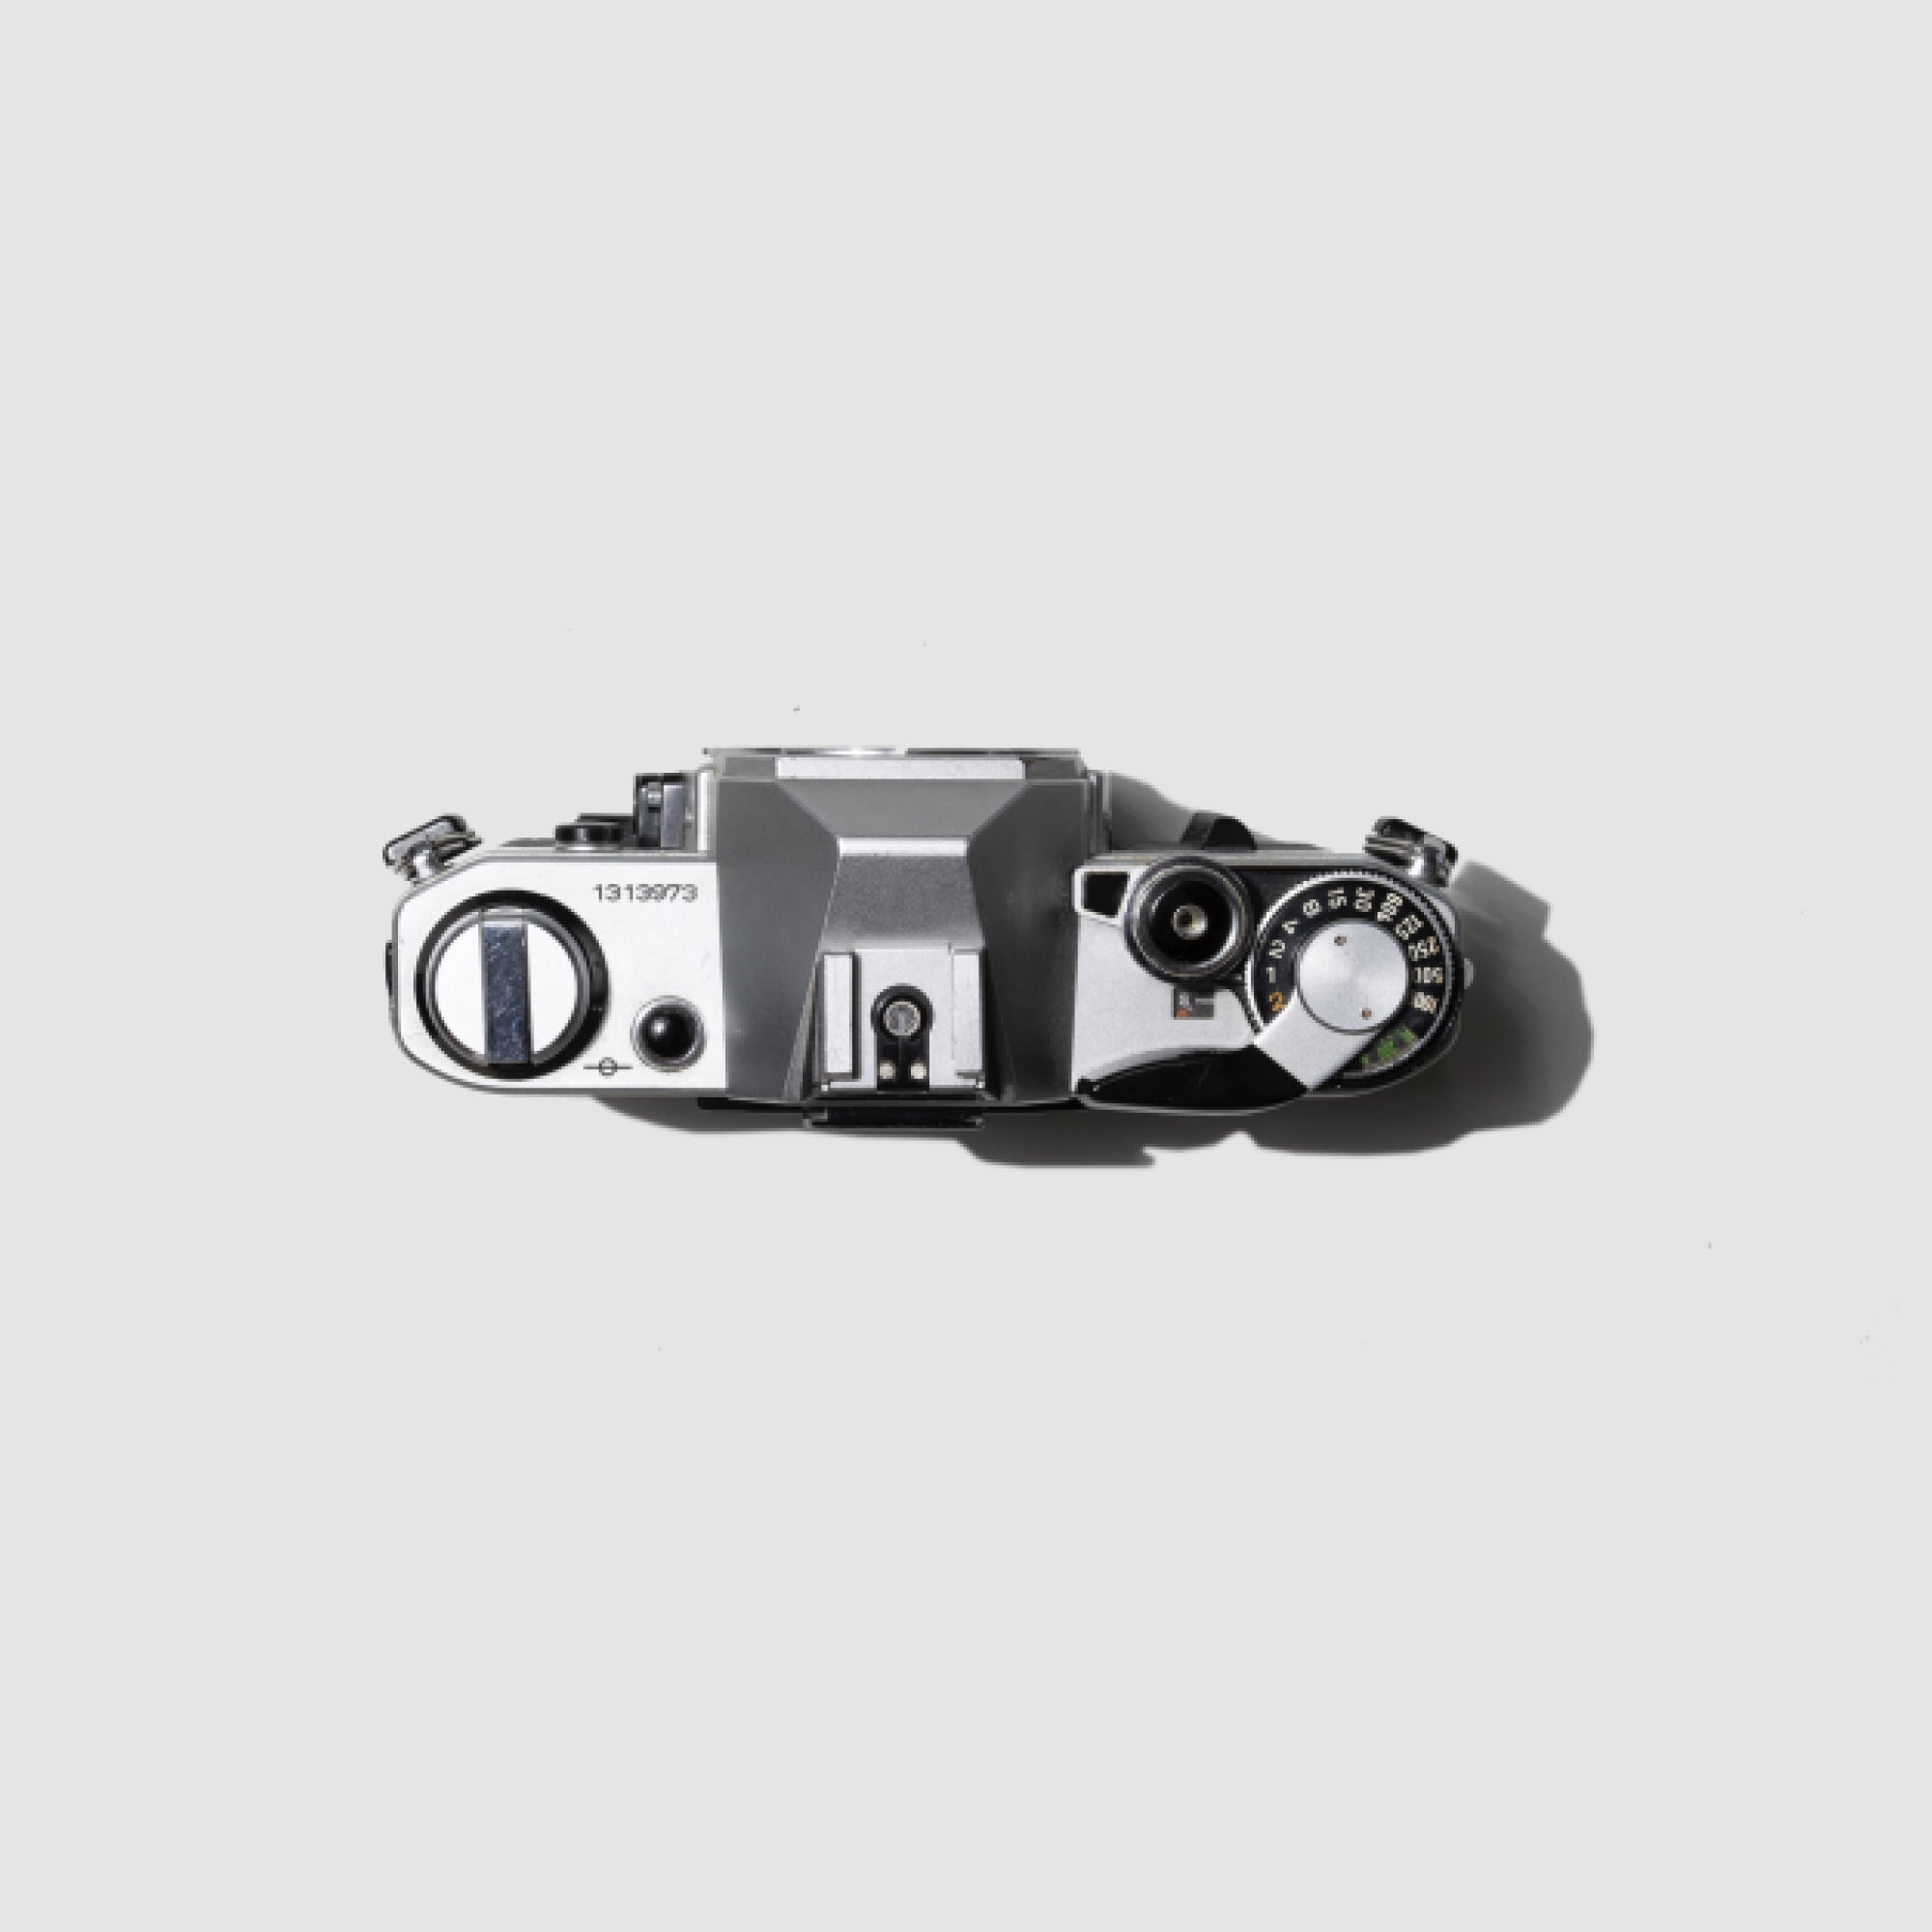 Buy Canon AE-1 now at Analogue Amsterdam